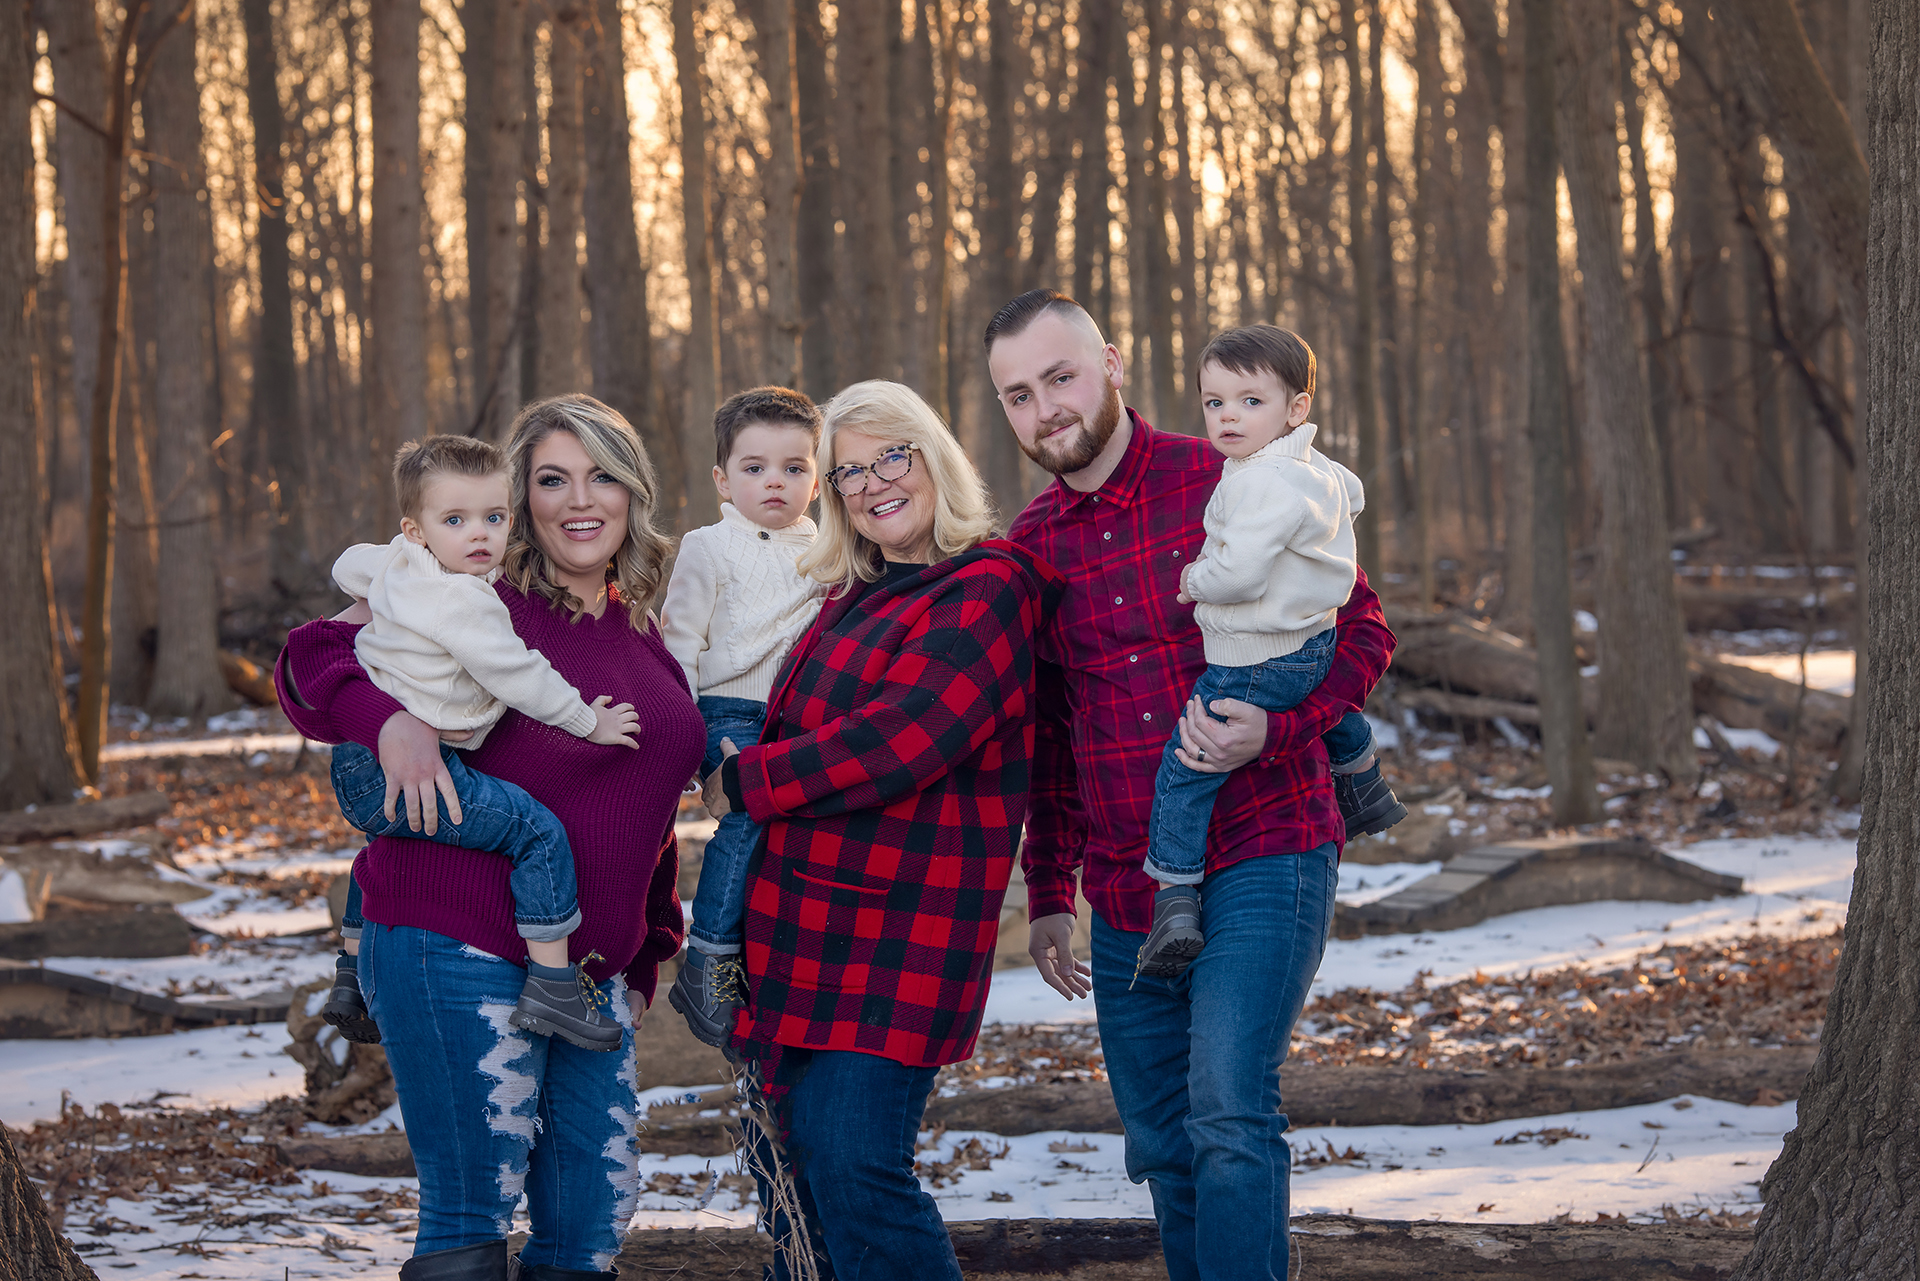 Three adults and three children pose among a snowy woodland landscape wearing coordinating red and white outfits for a family holiday photoshoot in Detroit.